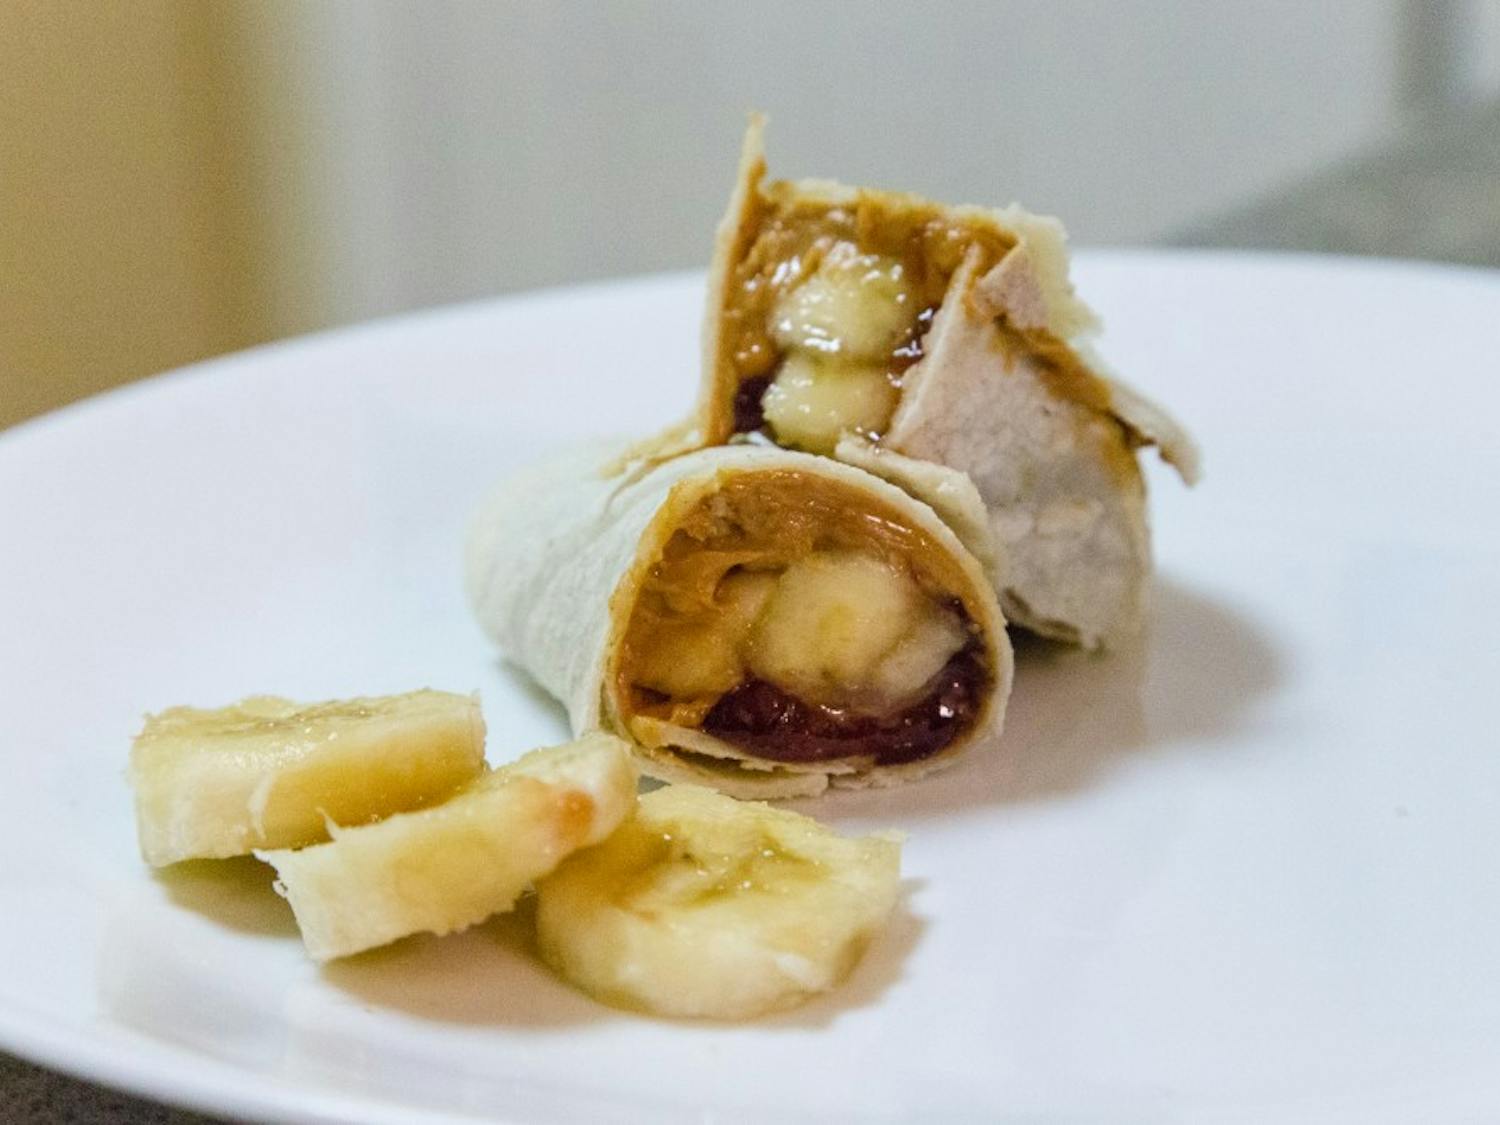 The banana burrito is a cheap and easy-to-make snack made of four main ingredients: bananas, jam, peanut butter and a tortilla. You can also add Nutella or strawberries to make the burrito even better. (Daniel Kwon/The State Press)